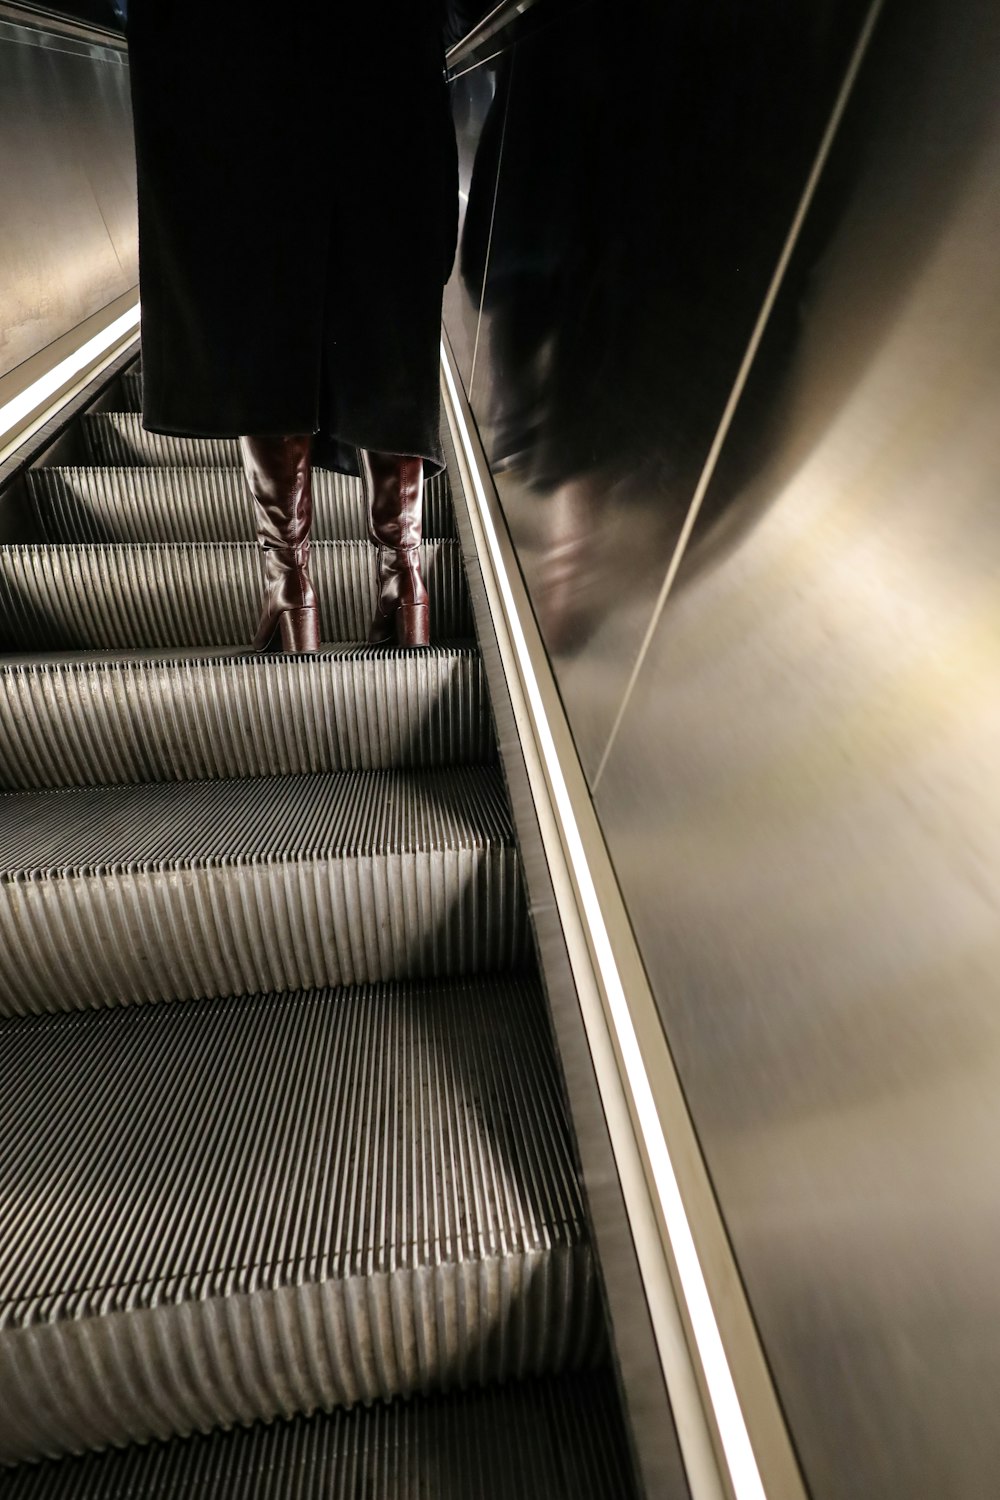 a person walking down an escalator with their feet up